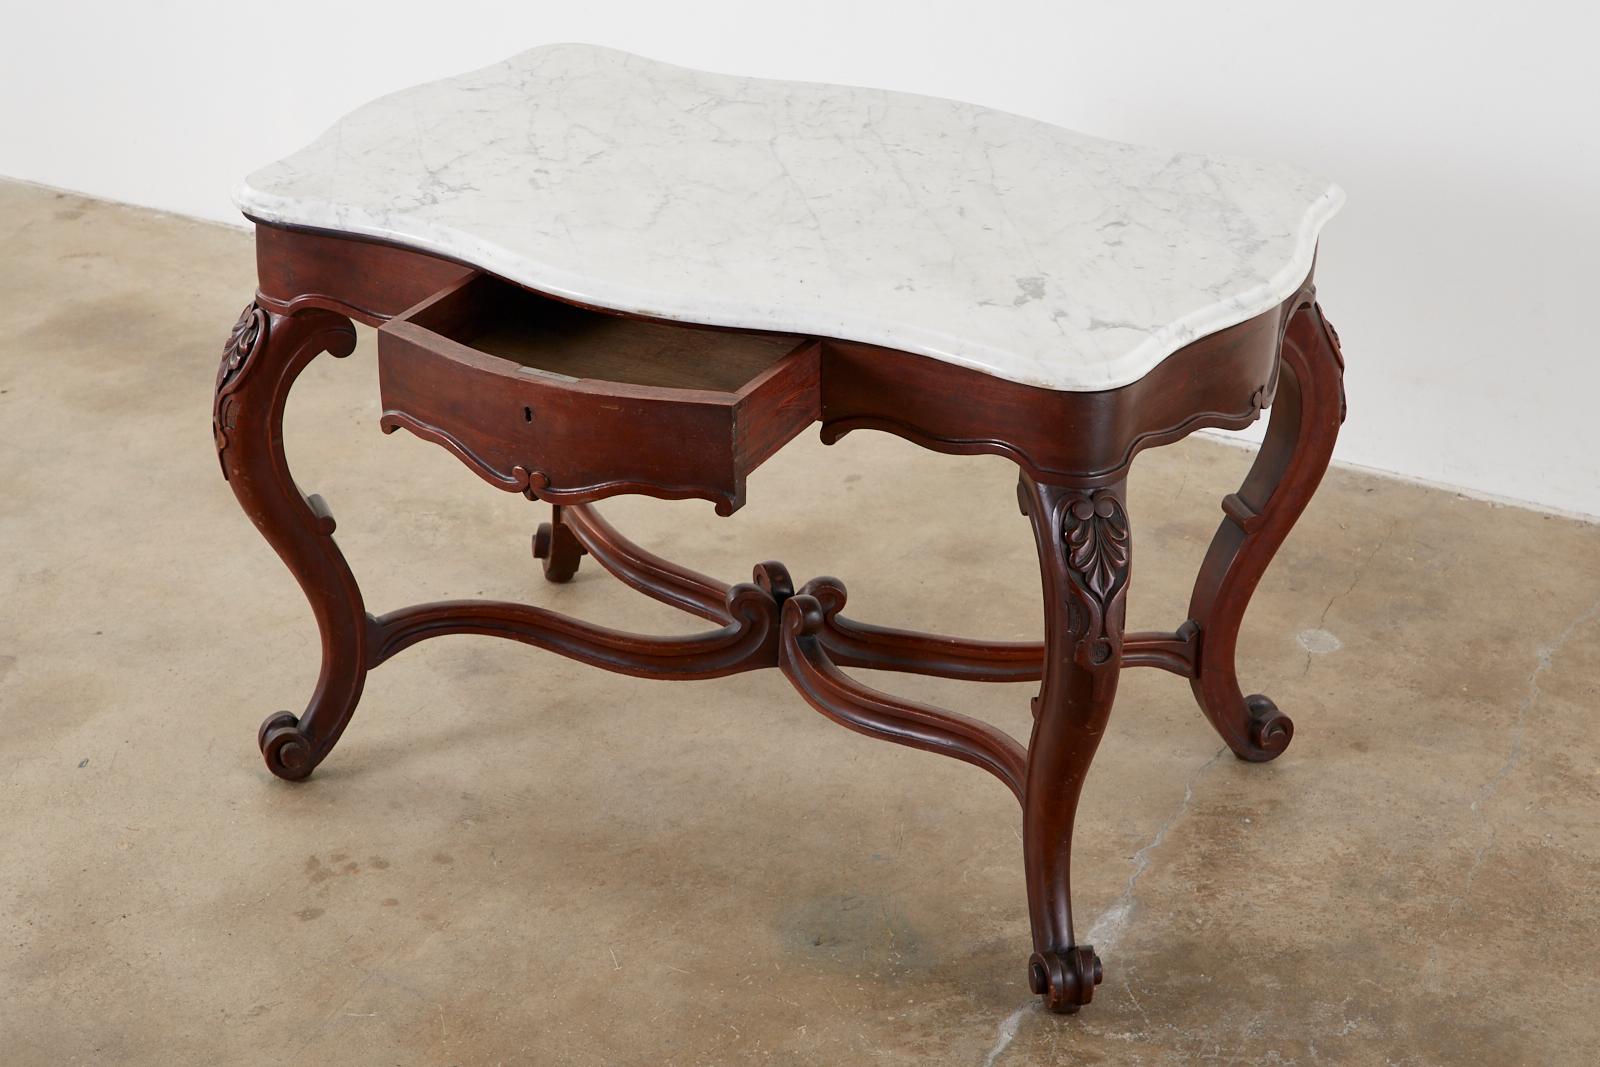 Curvaceous 19th century English Victorian library table or writing table desk. The table features a 1